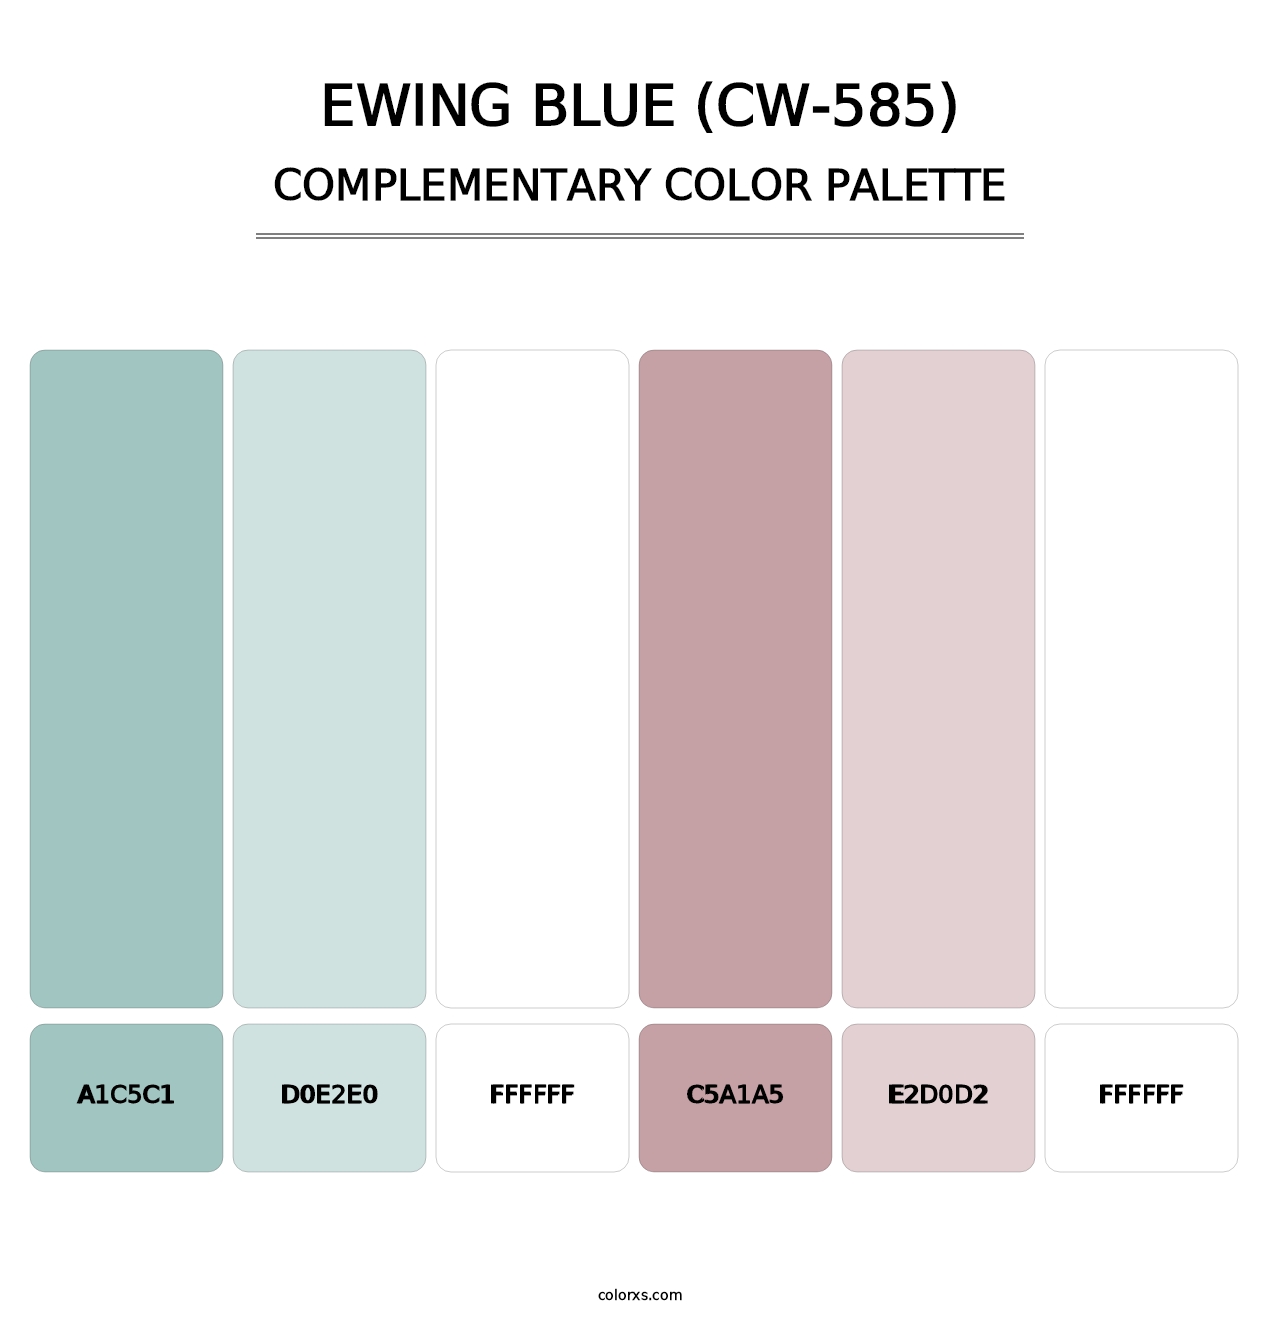 Ewing Blue (CW-585) - Complementary Color Palette